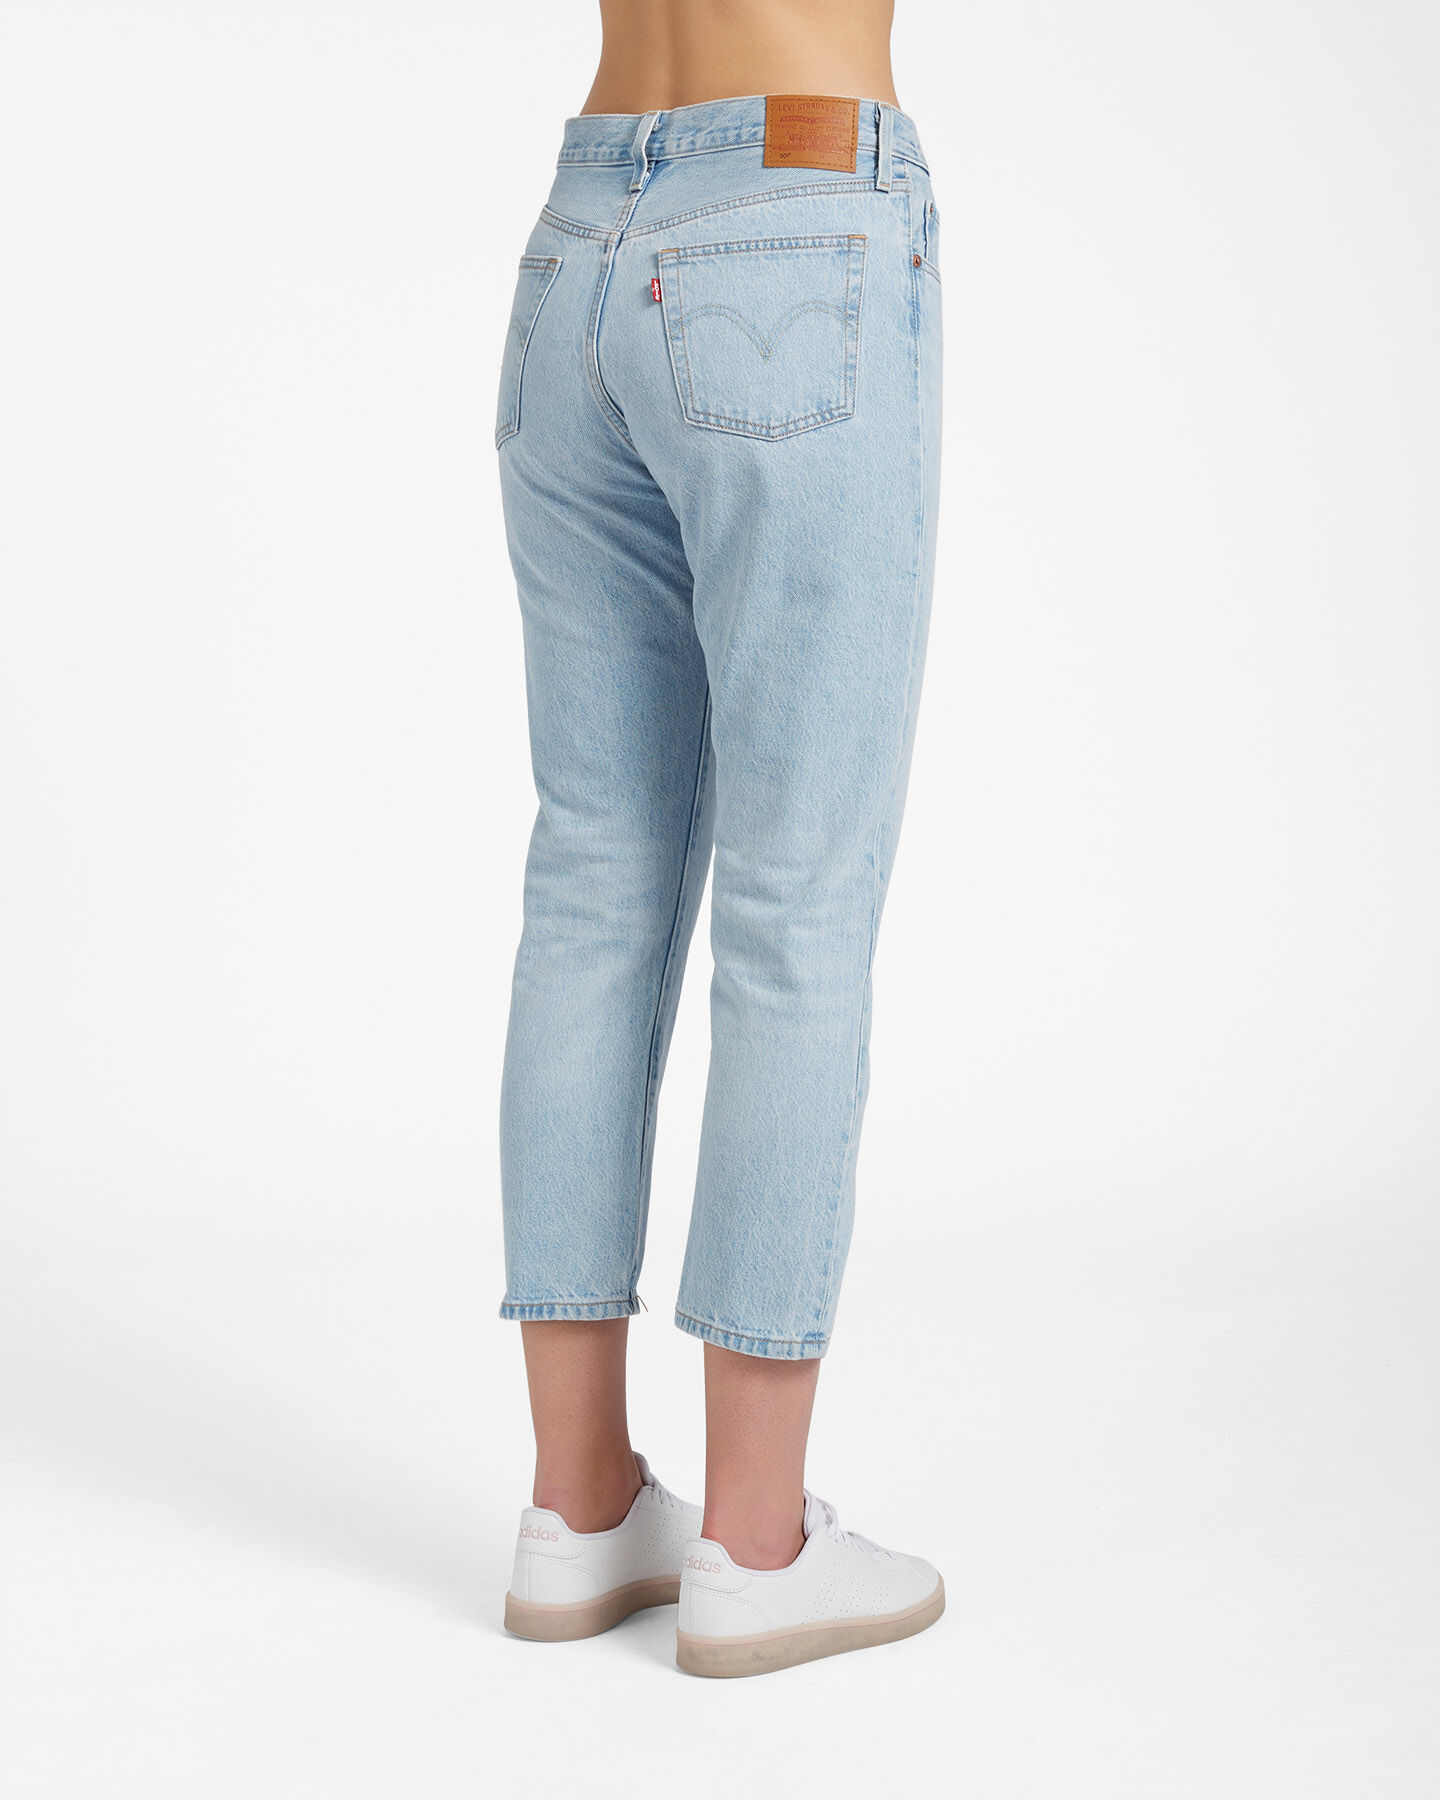  Jeans LEVI'S 501 CROP HIGH RISE L26 W S4088777 scatto 1